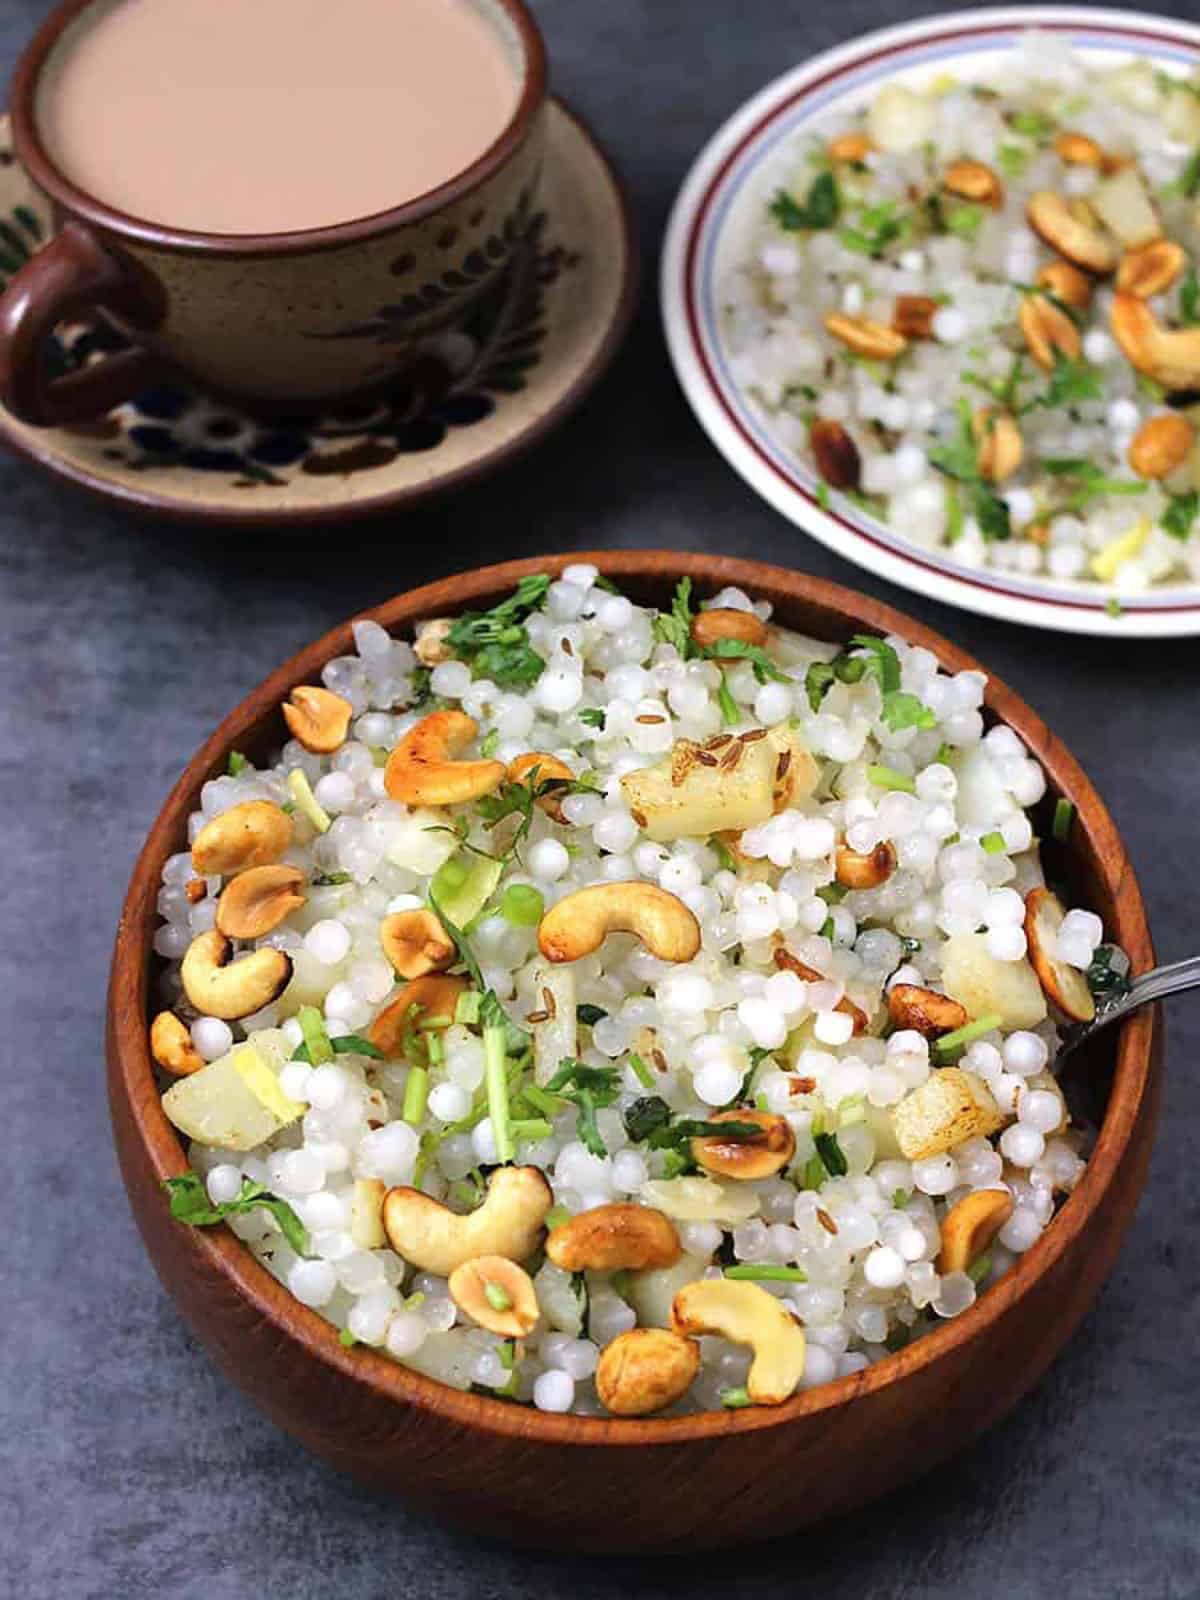 sabudana khichdi in a bowl garnished with roasted peanuts and cashews, served with a cup of hot chai.